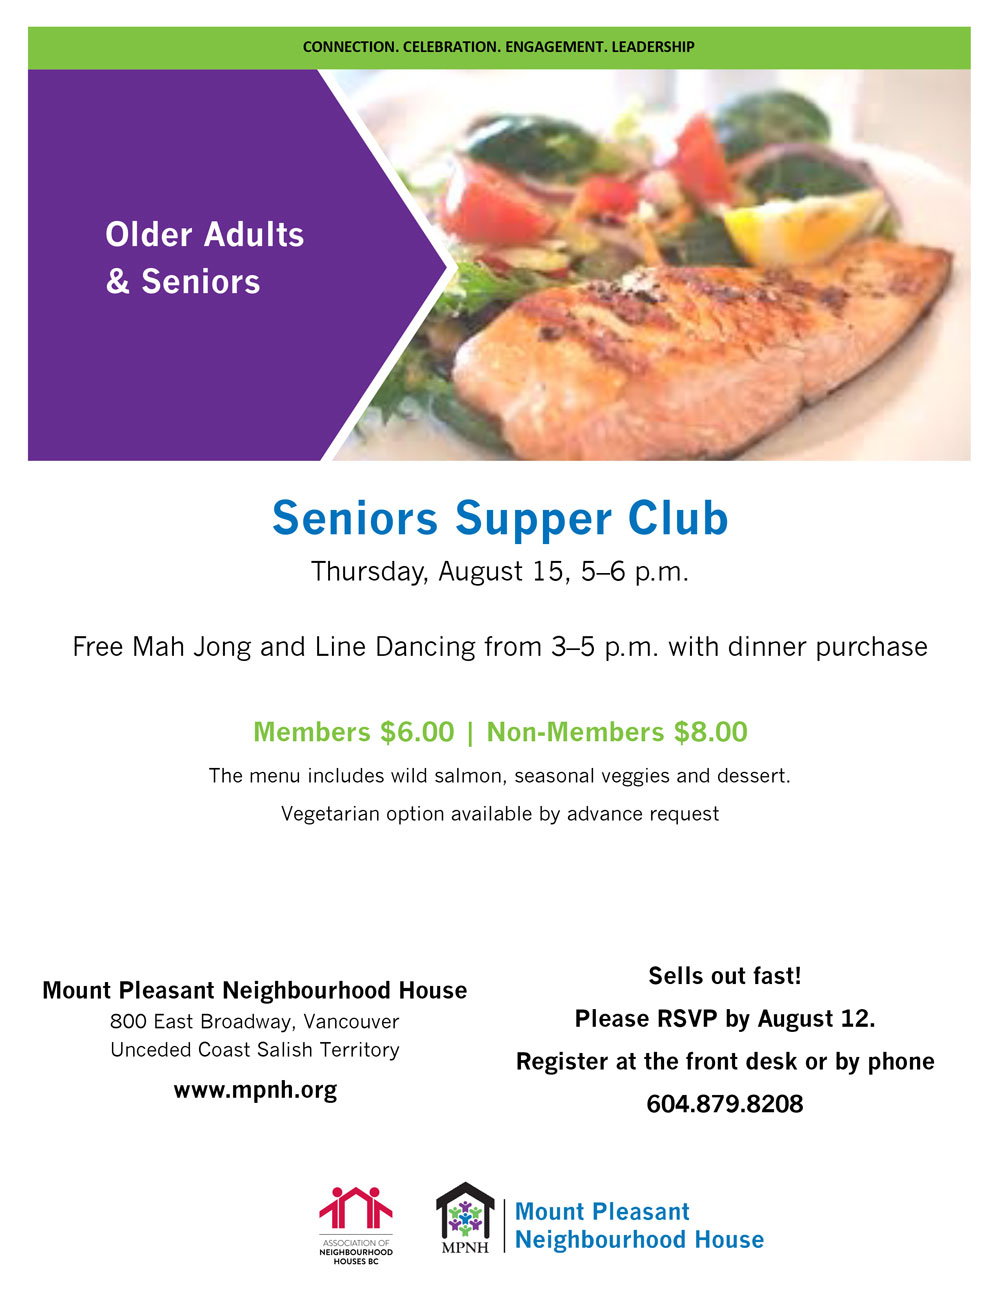 An image of the poster with event details, featuring a photo of a meal with grilled salmon and veggies